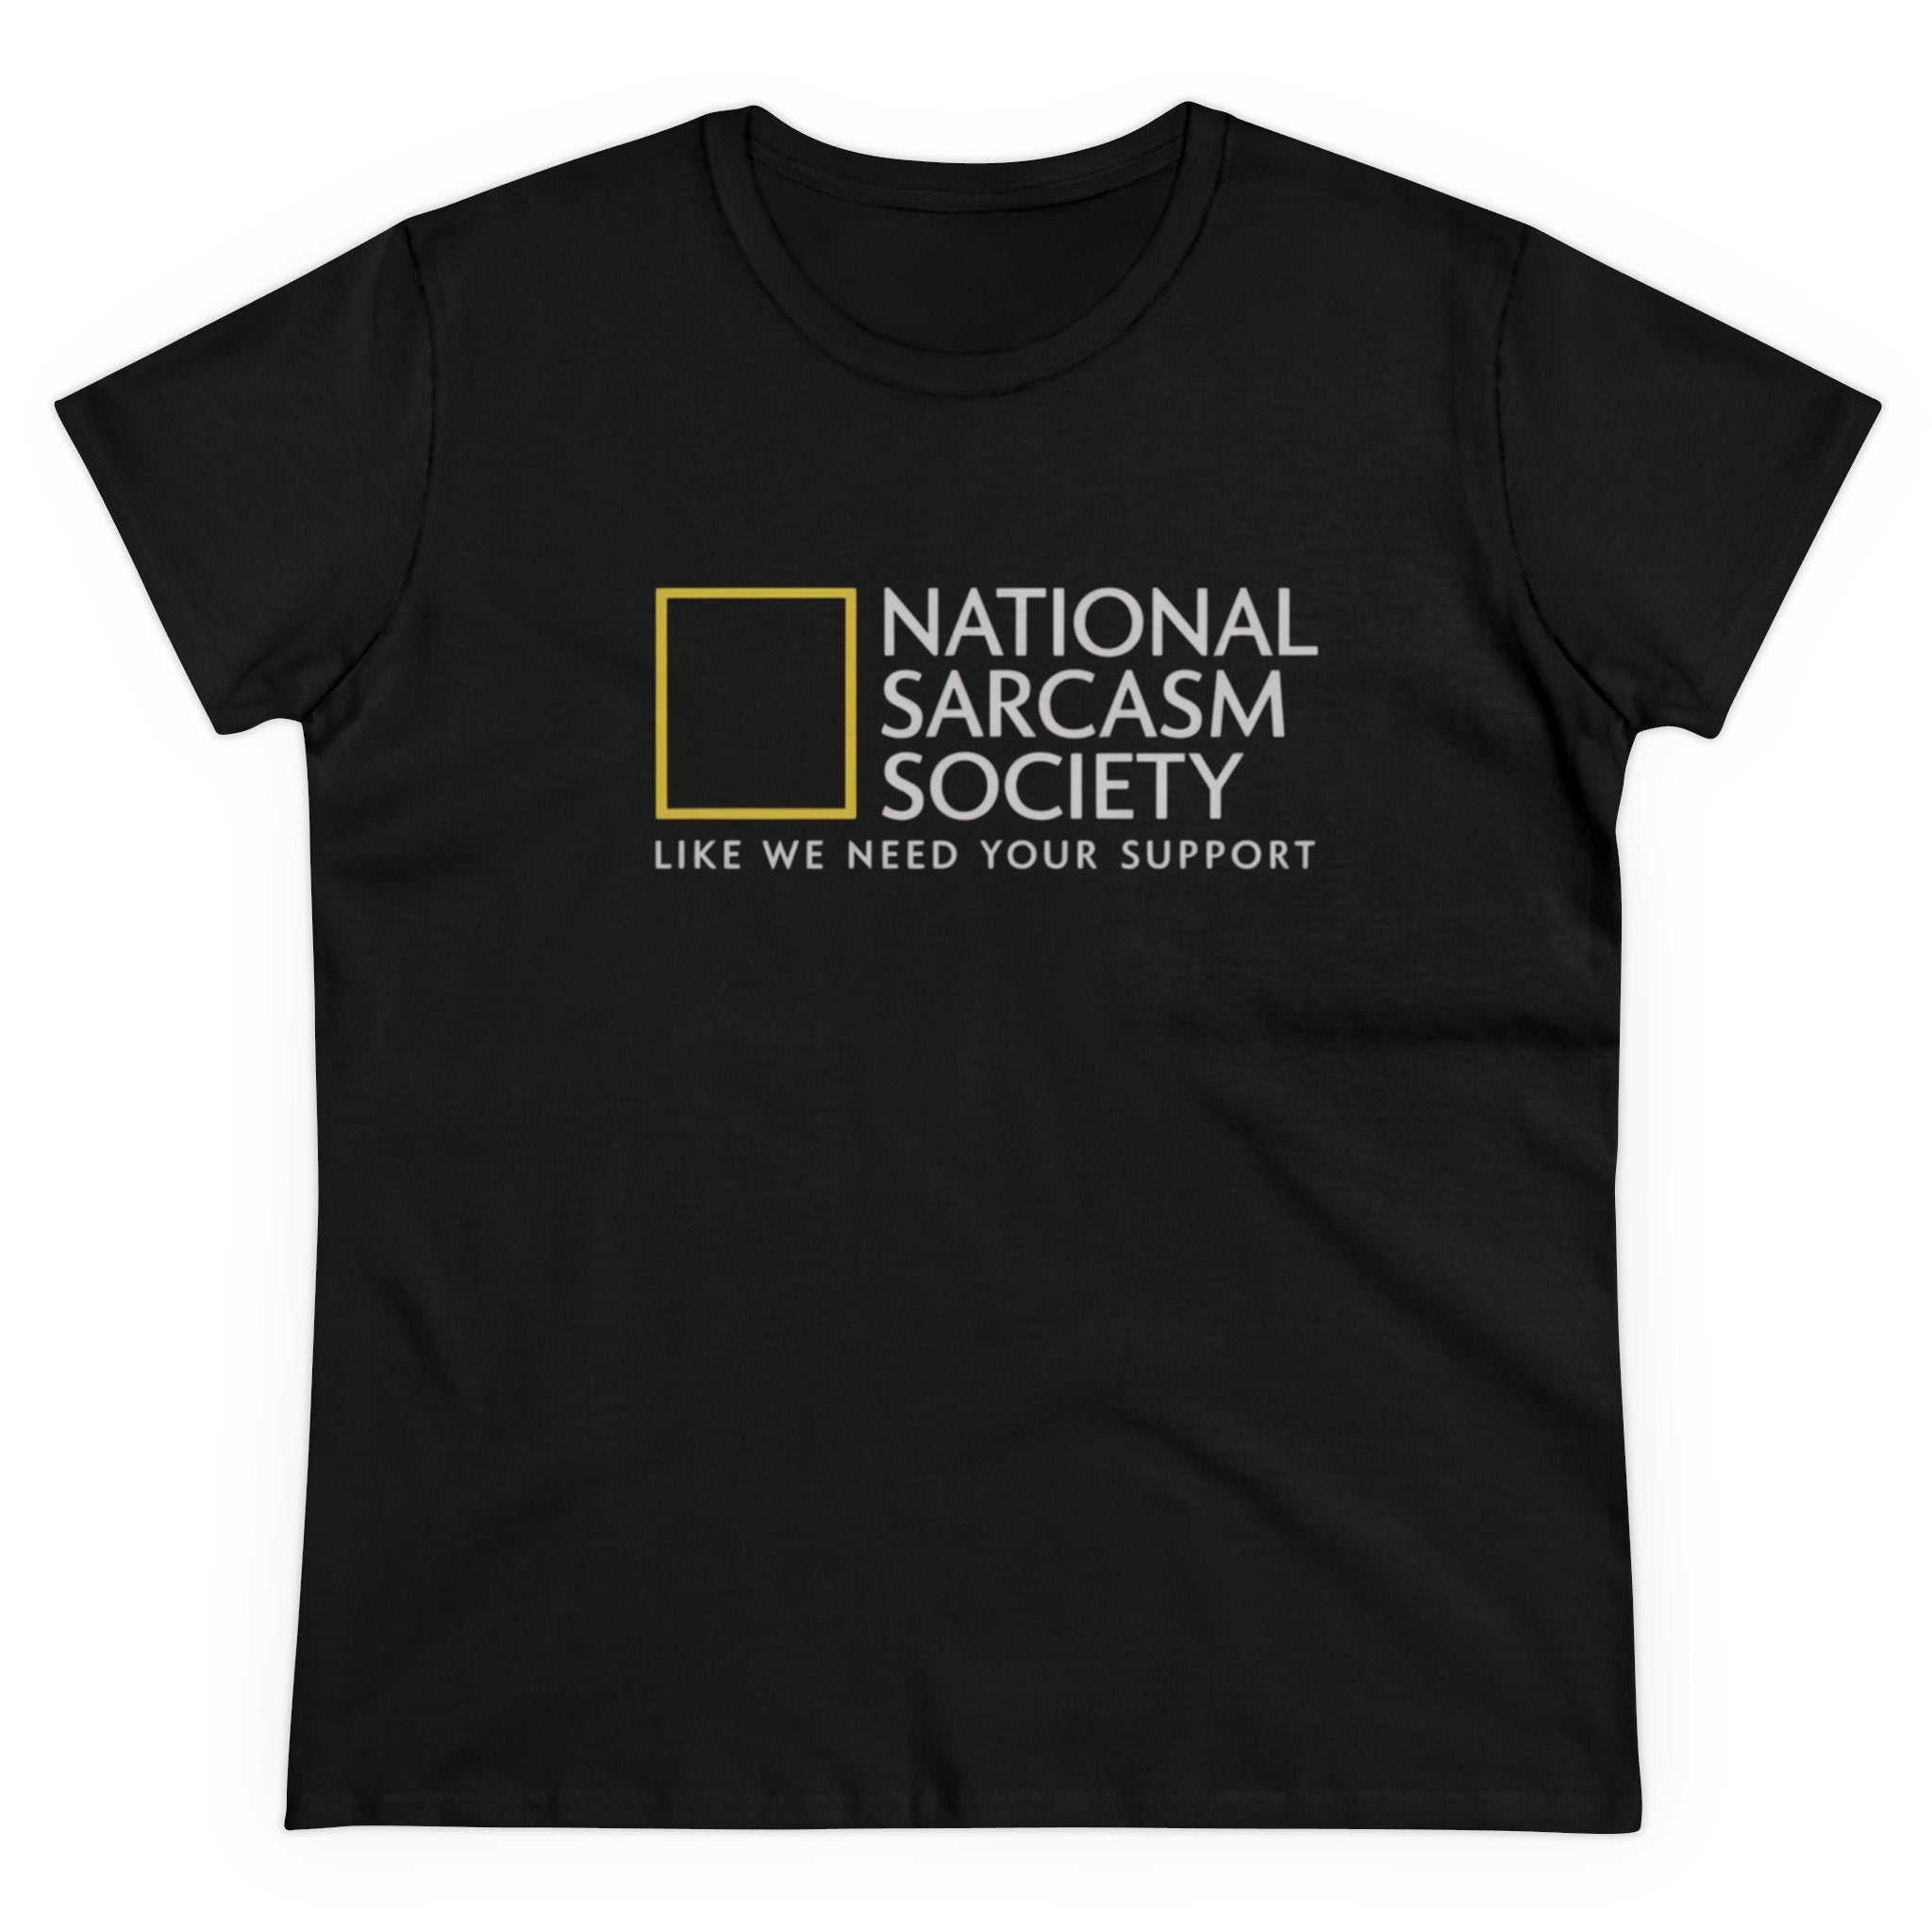 Trendy black National Sarcasm Society - Women's Tee featuring the text "National Sarcasm Society" and a slogan underneath reading "Like we need your support.